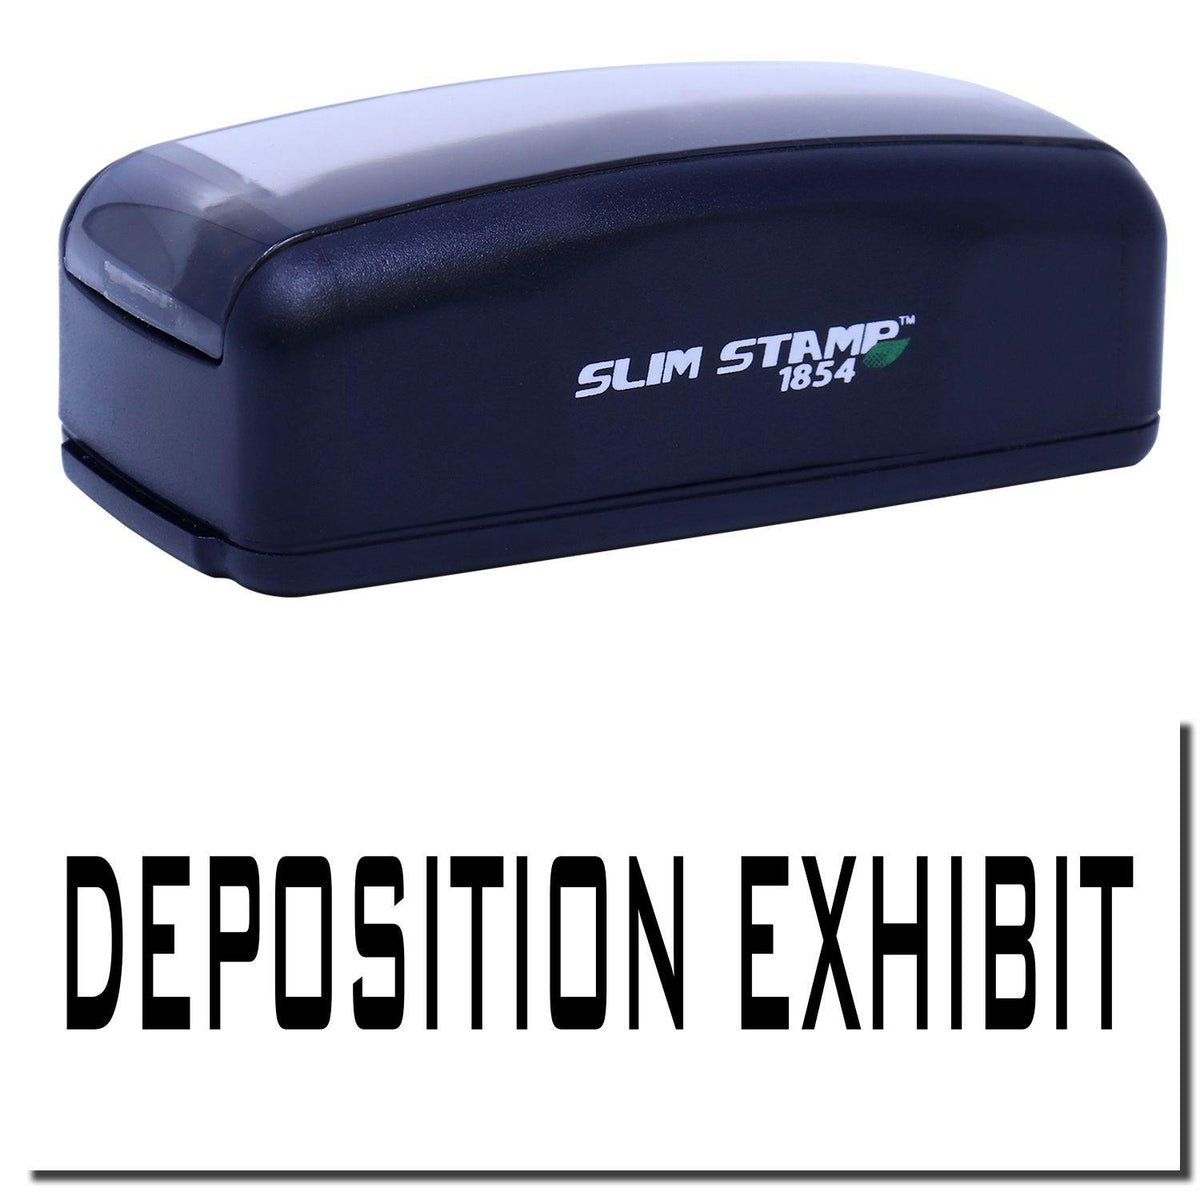 Large Pre Inked Deposition Exhibit Stamp Main Image